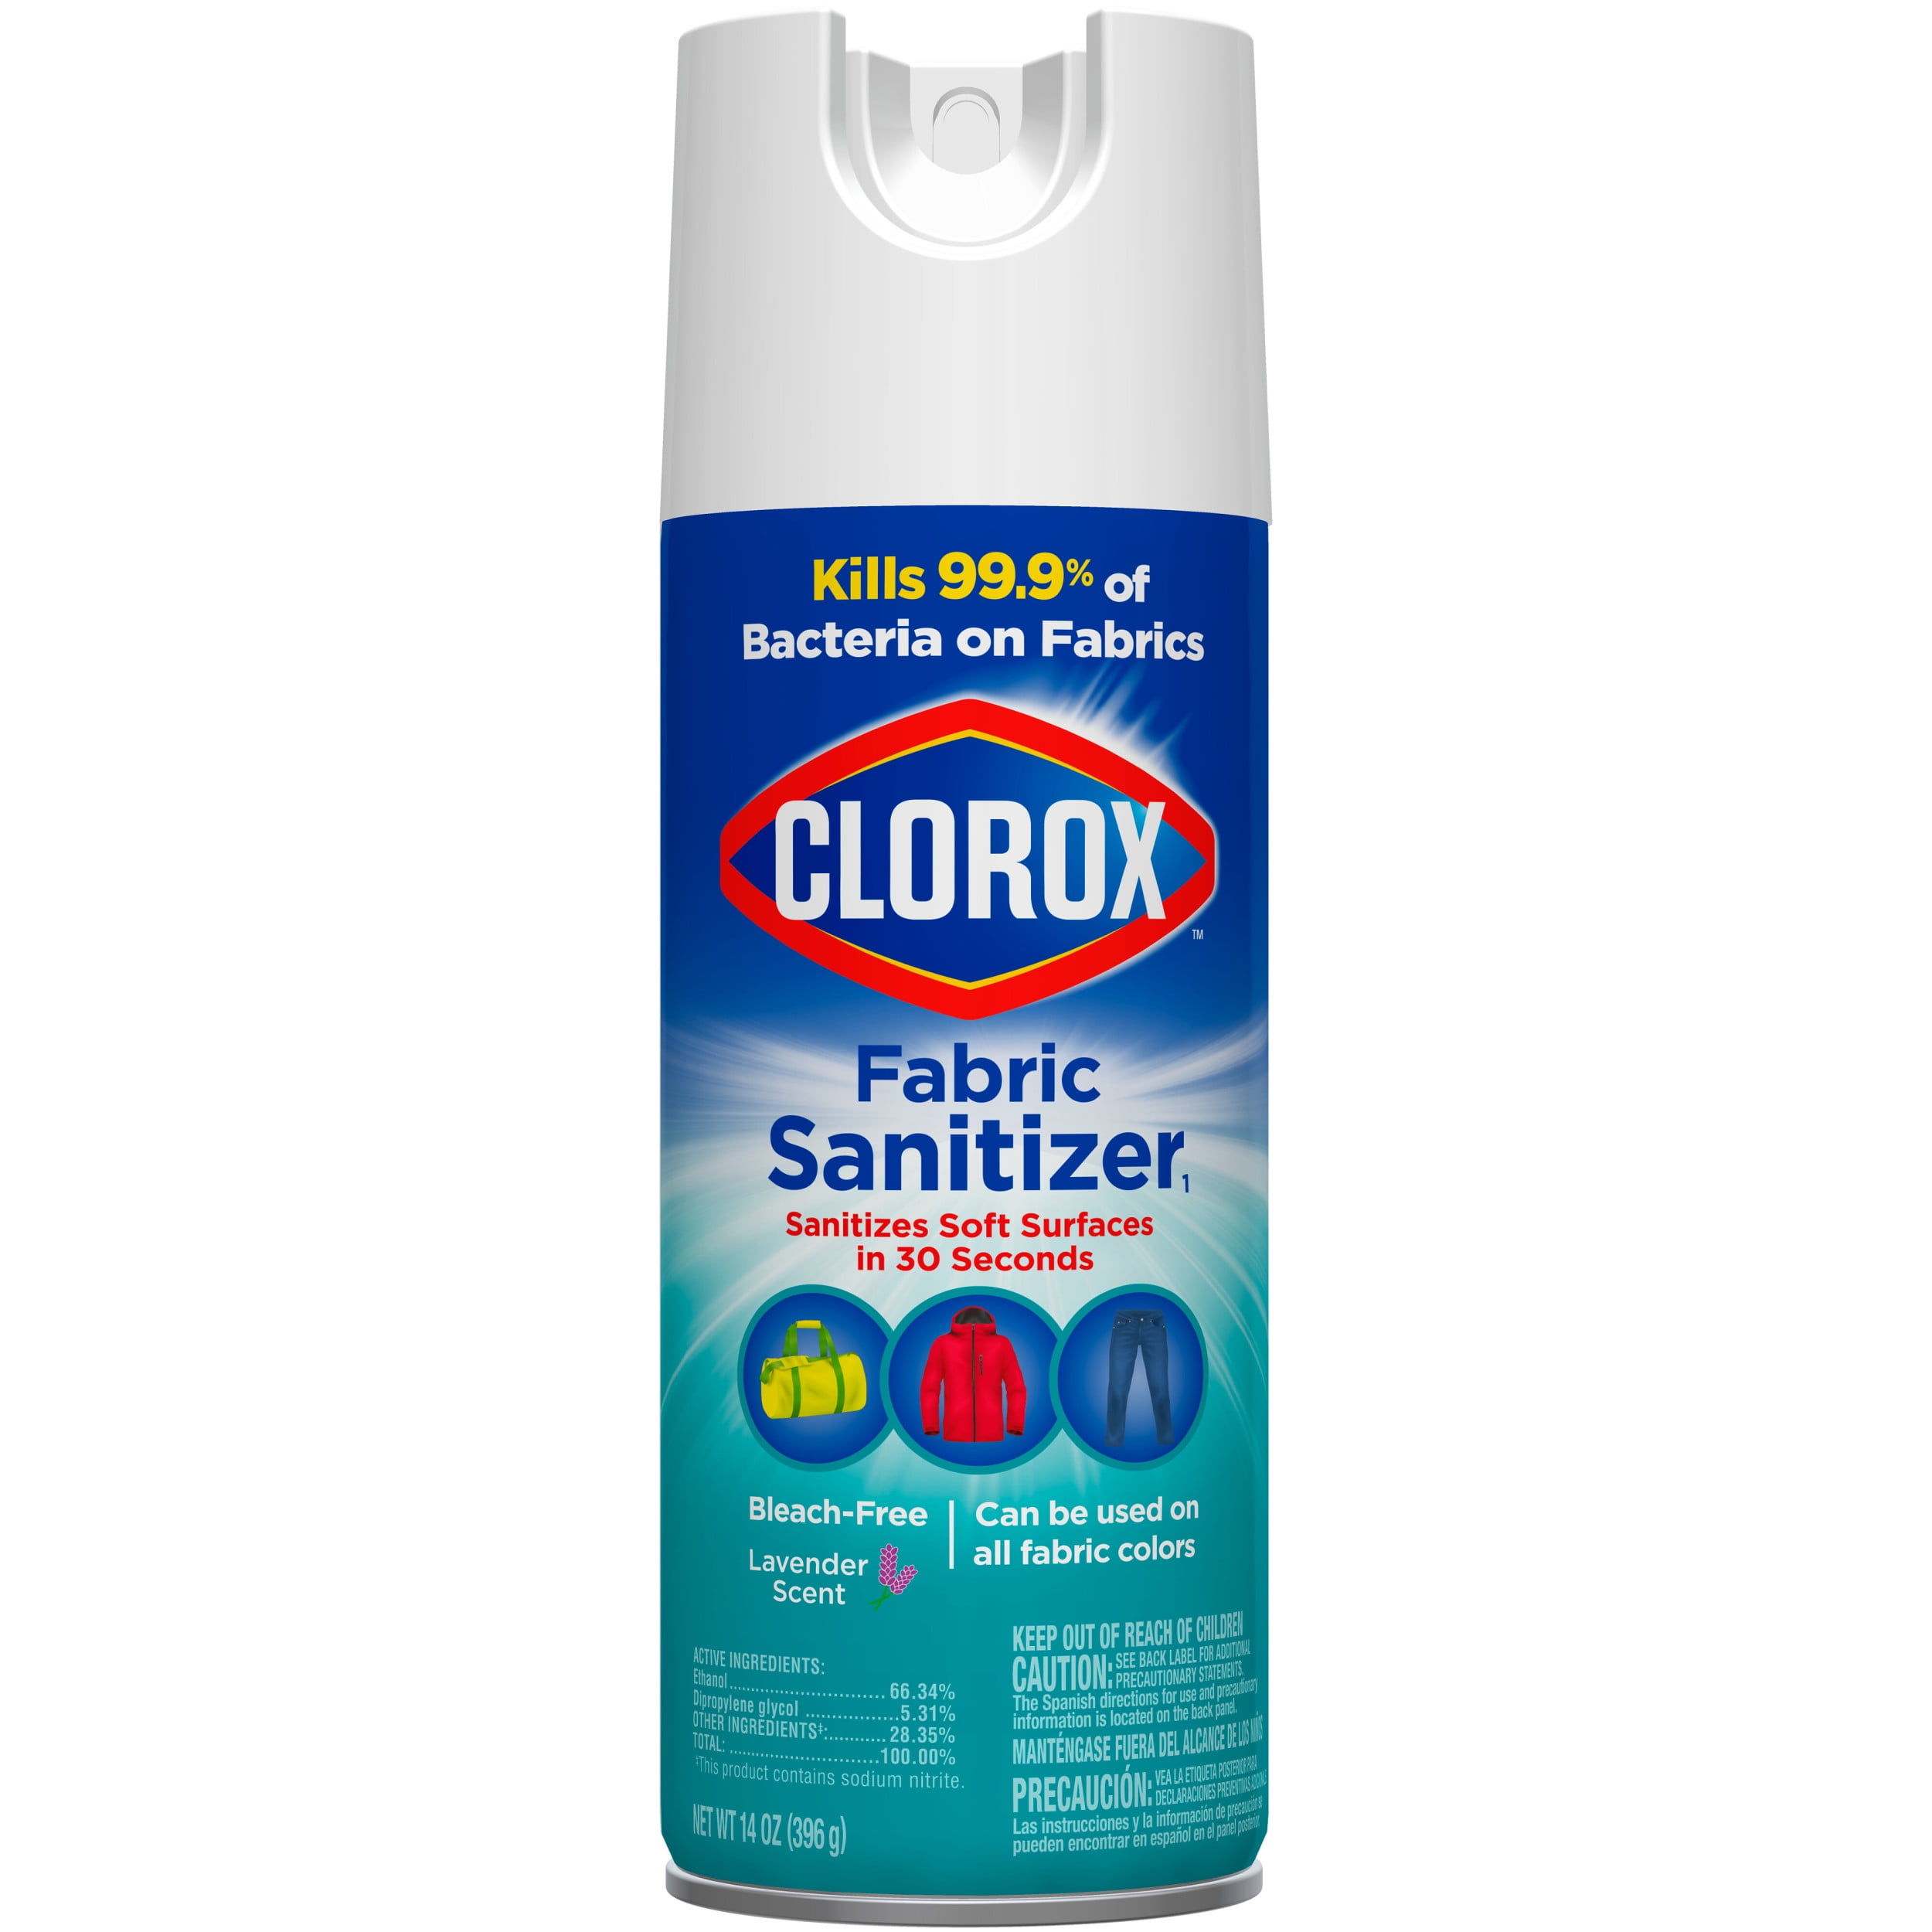 Clorox Fabric Sanitizer, Tough odors can stay on fabric even through the  wash 🦠 Clorox Fabric Sanitizer is a color-safe, bleach-free additive that  kills 99.9% of odor-causing, By Clorox